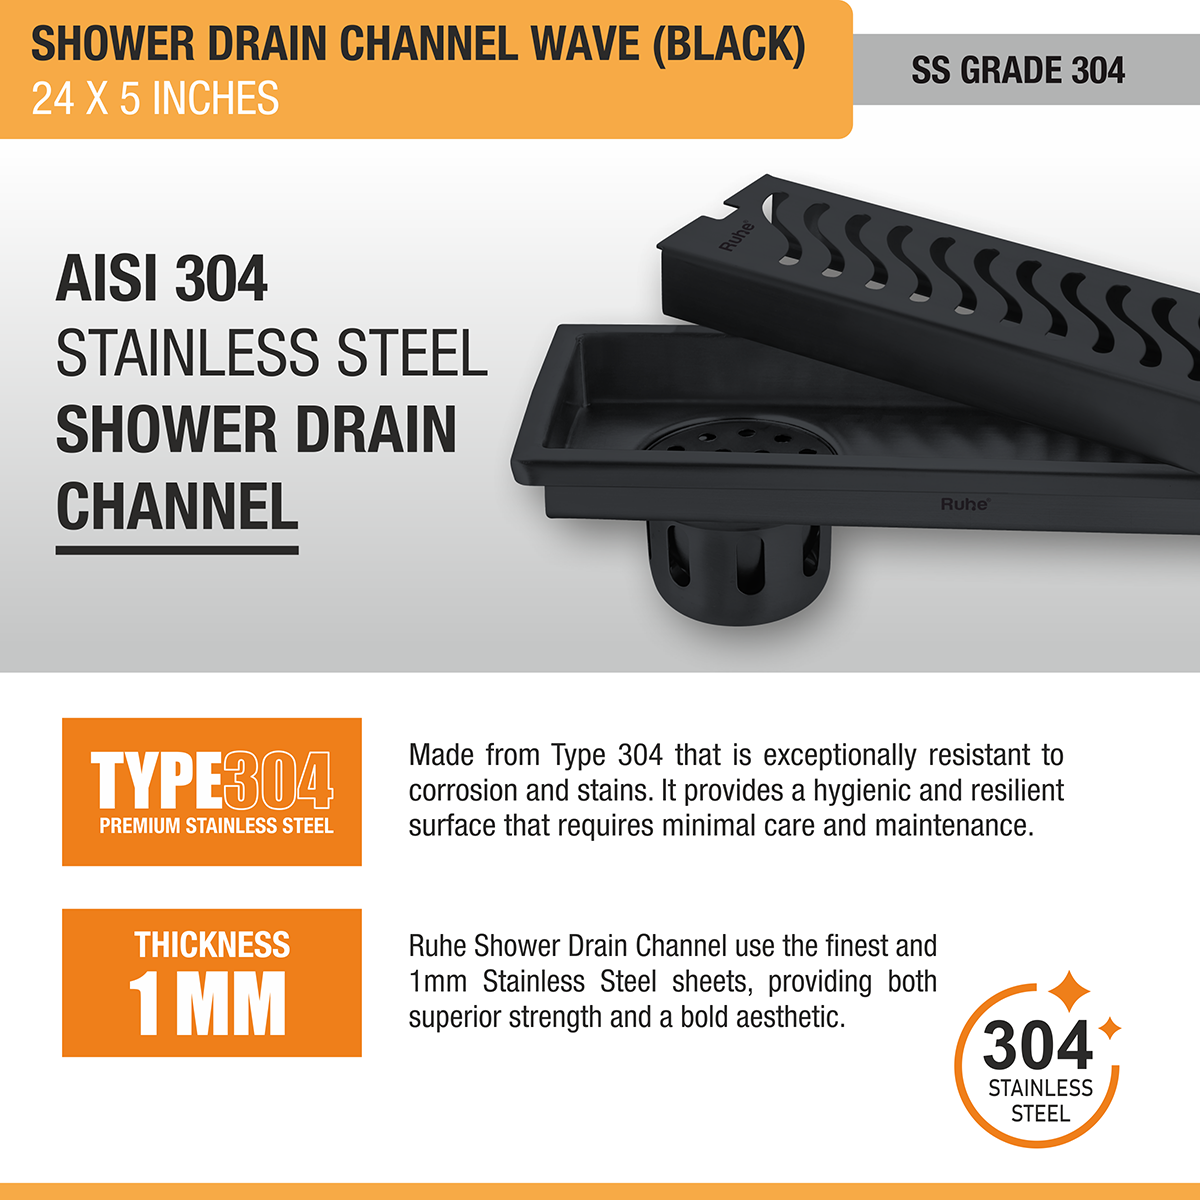 Wave Shower Drain Channel (24 x 5 Inches) Black PVD Coated stainless steel